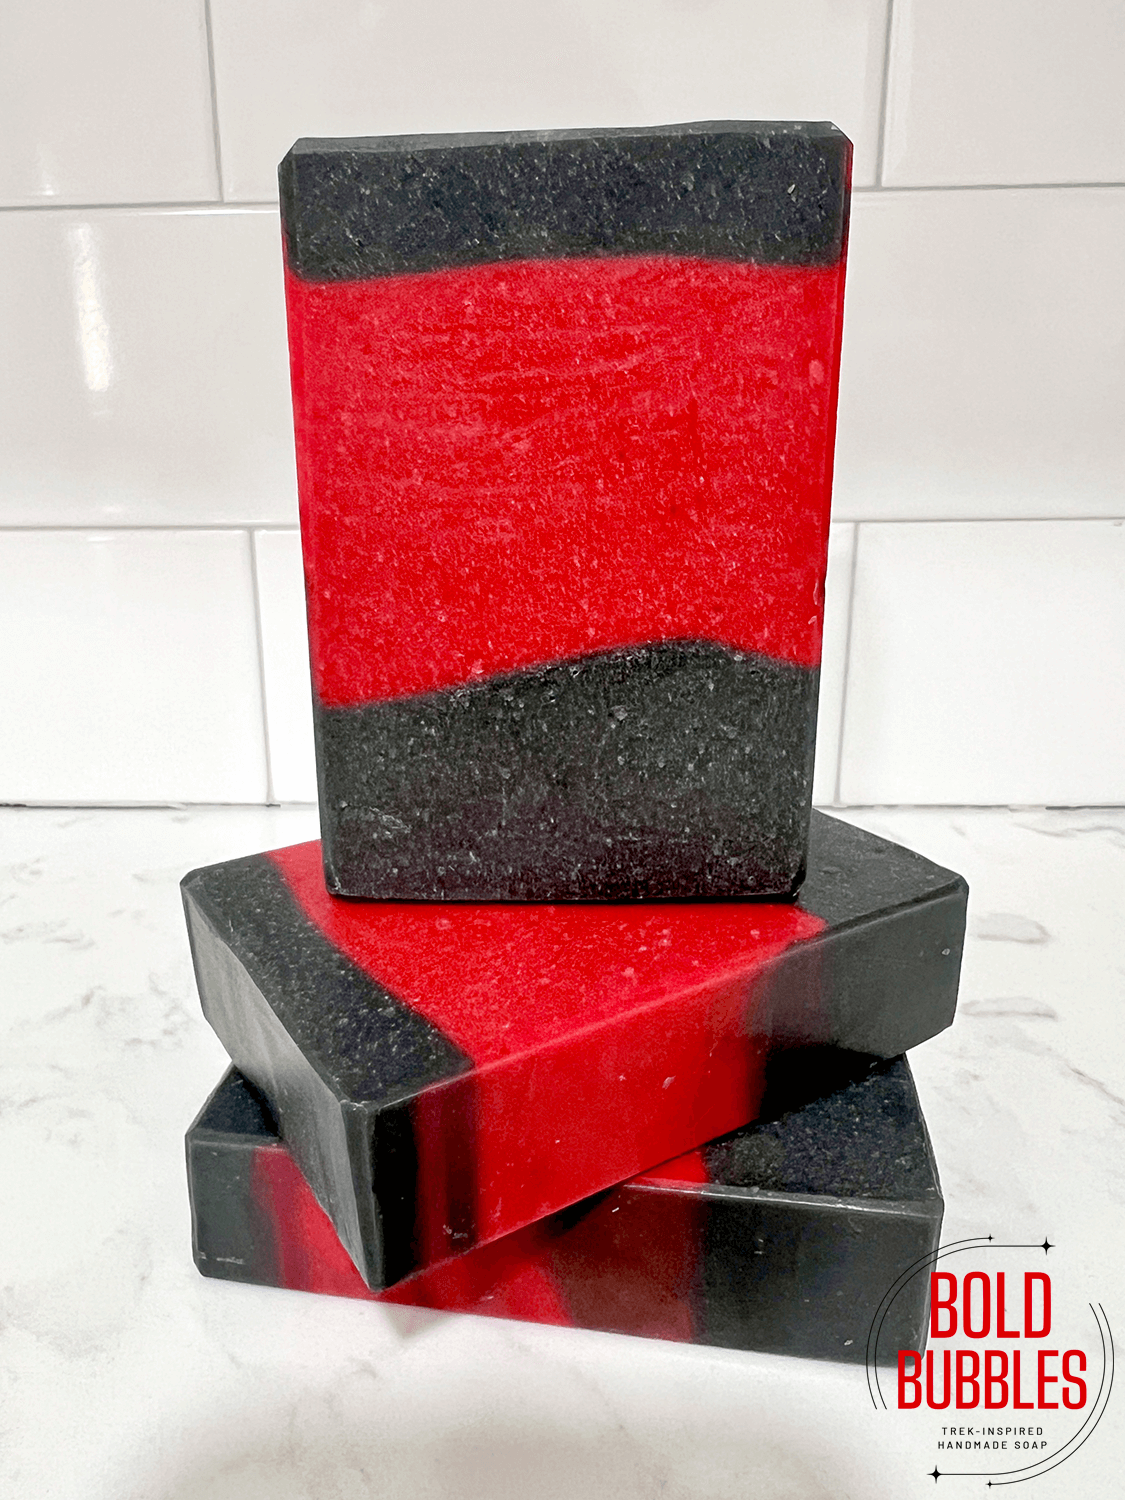 A red and black bar of soap inspired by the iconic Star Trek TNG uniform. This soap is scented with an earl grey tea fragrance in honor of Captain Picard.